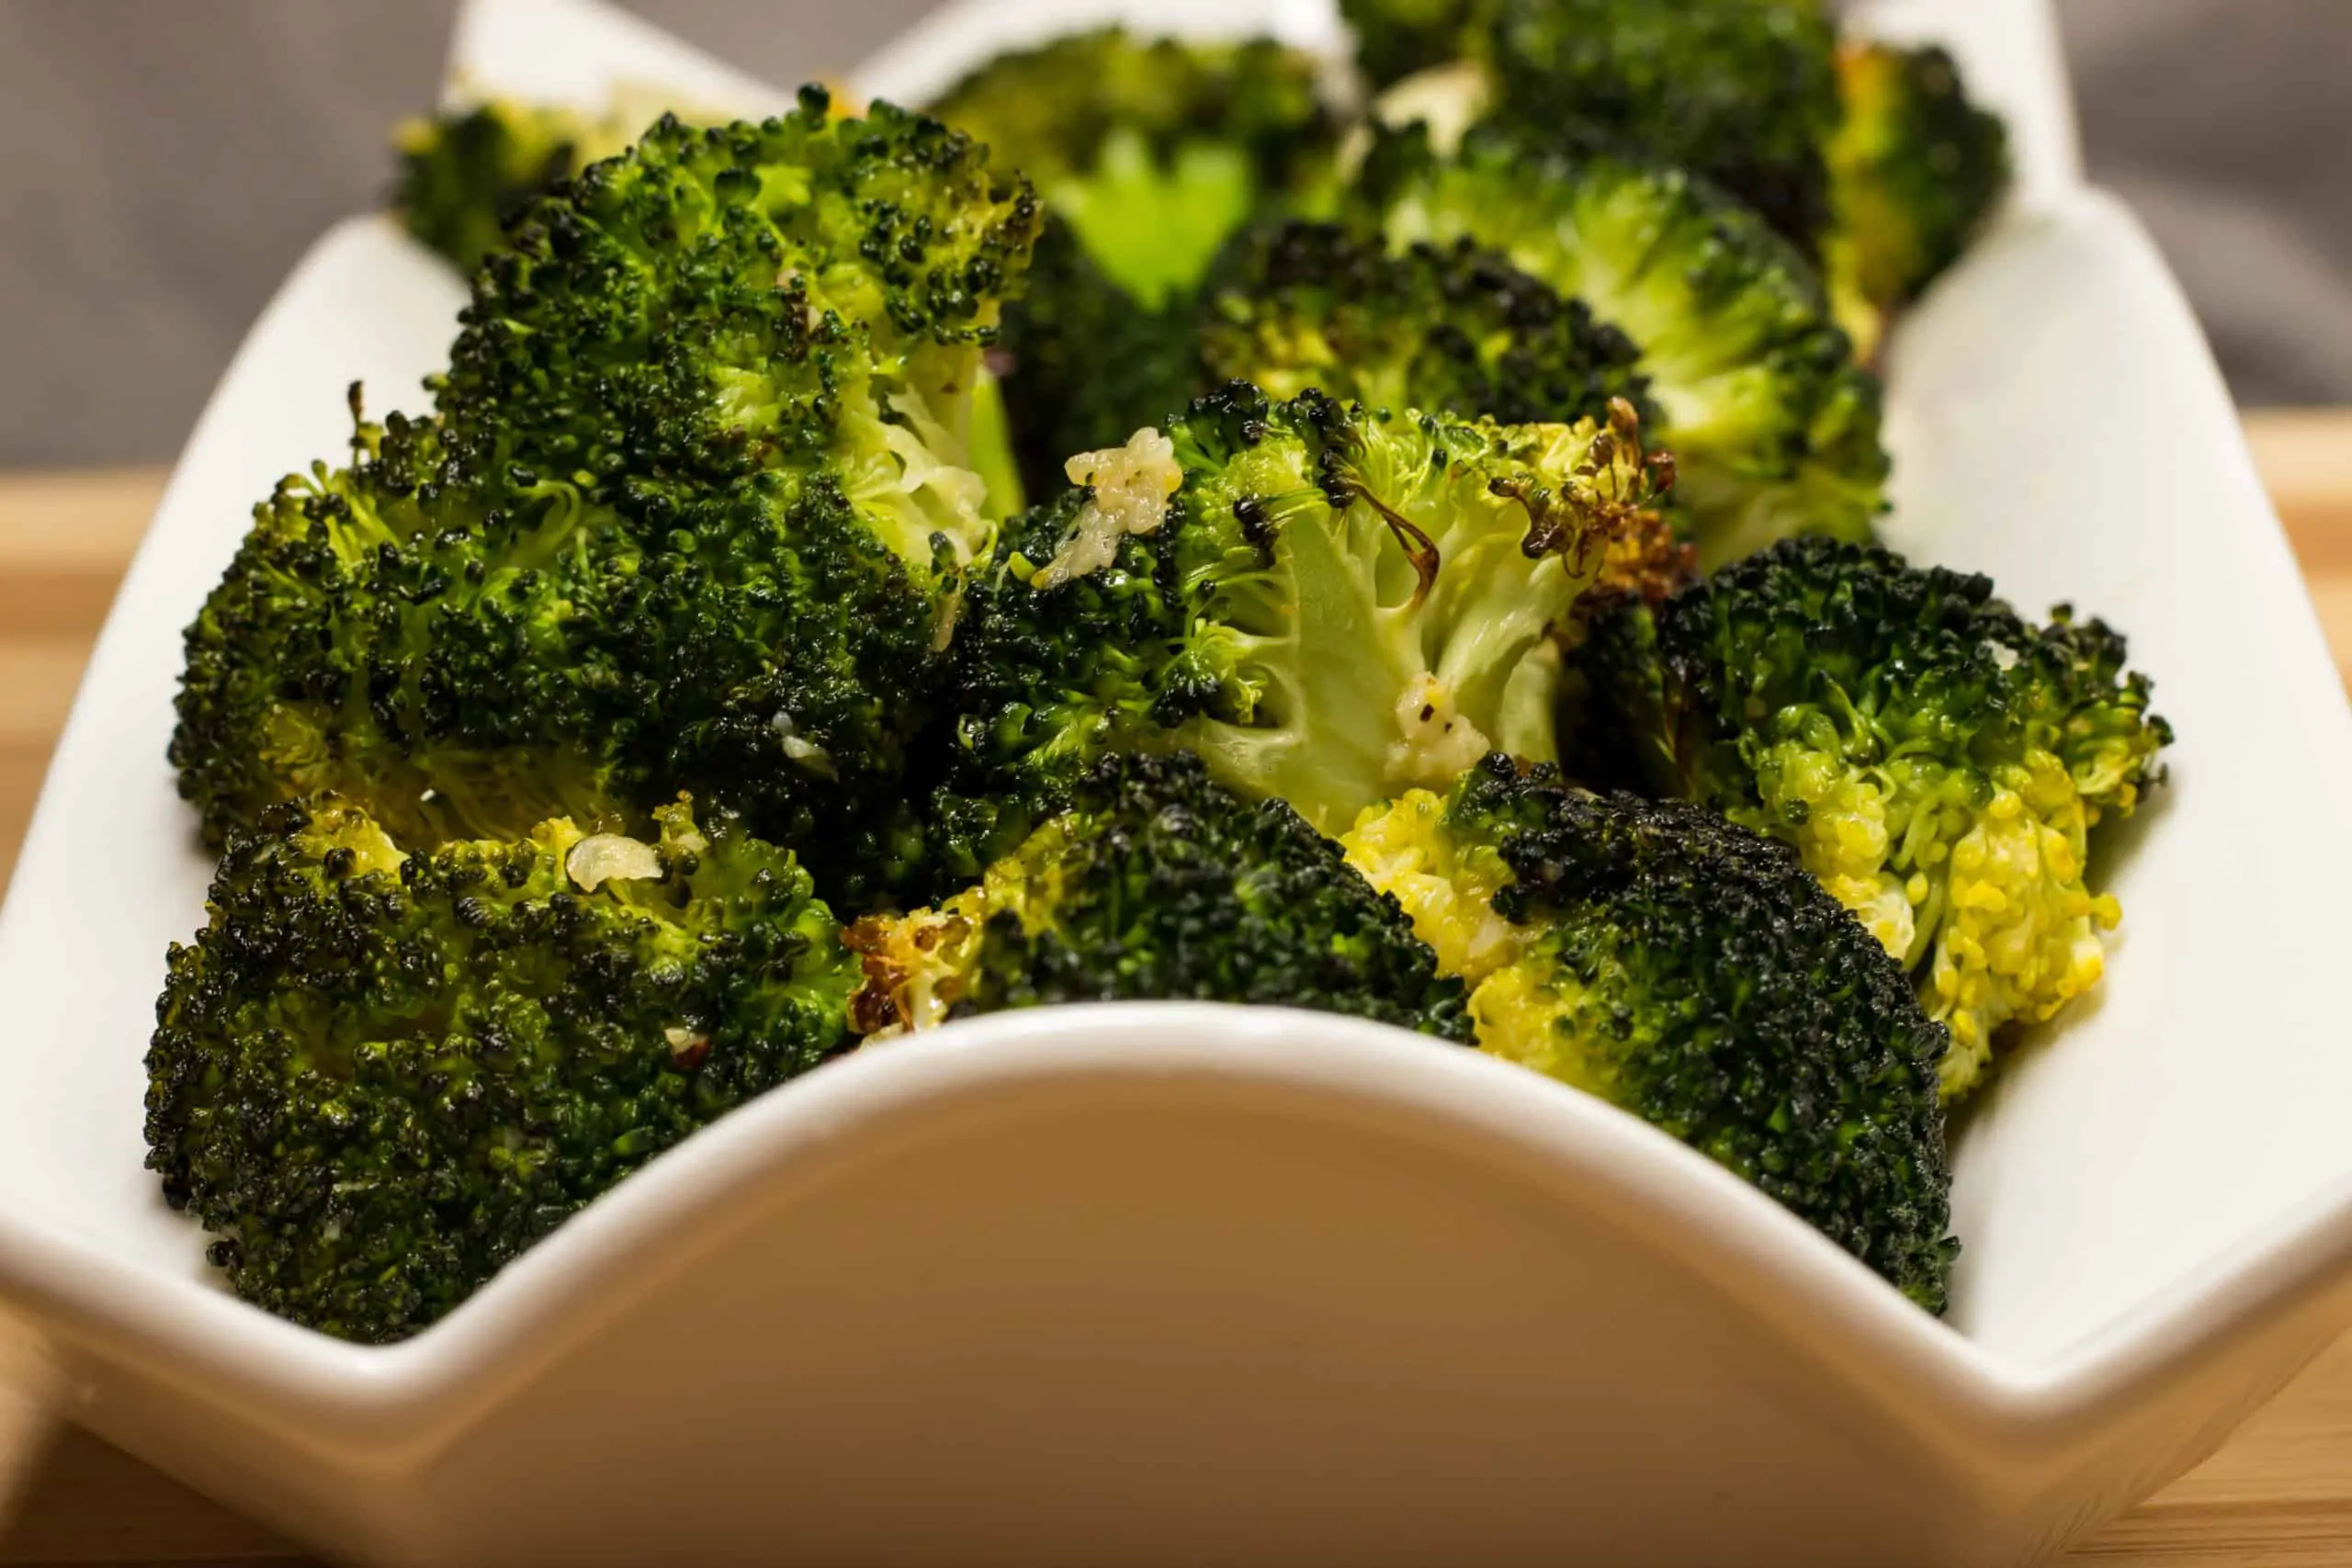 Nutty and toasty from the oven, this roasted broccoli is keto and delicious!